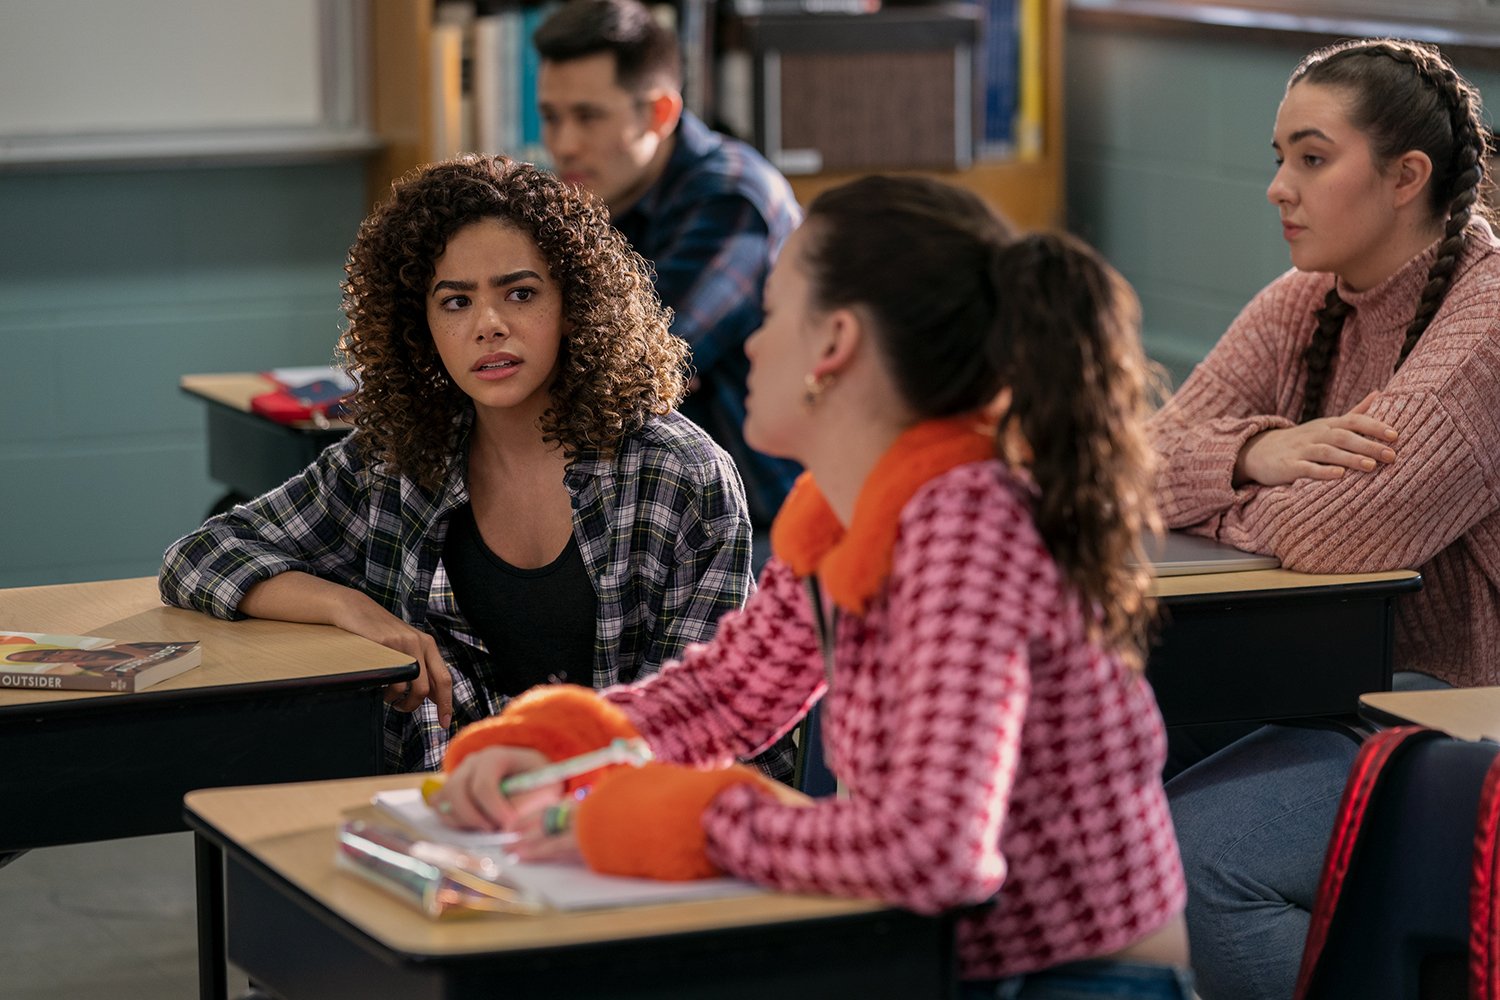 Ginny & Georgia Season 2: Antonia Gentry's Ginny and Sara Waisglass's Max sit beside each other in a classroom as Ginny looks at Max with a disgusted expression.